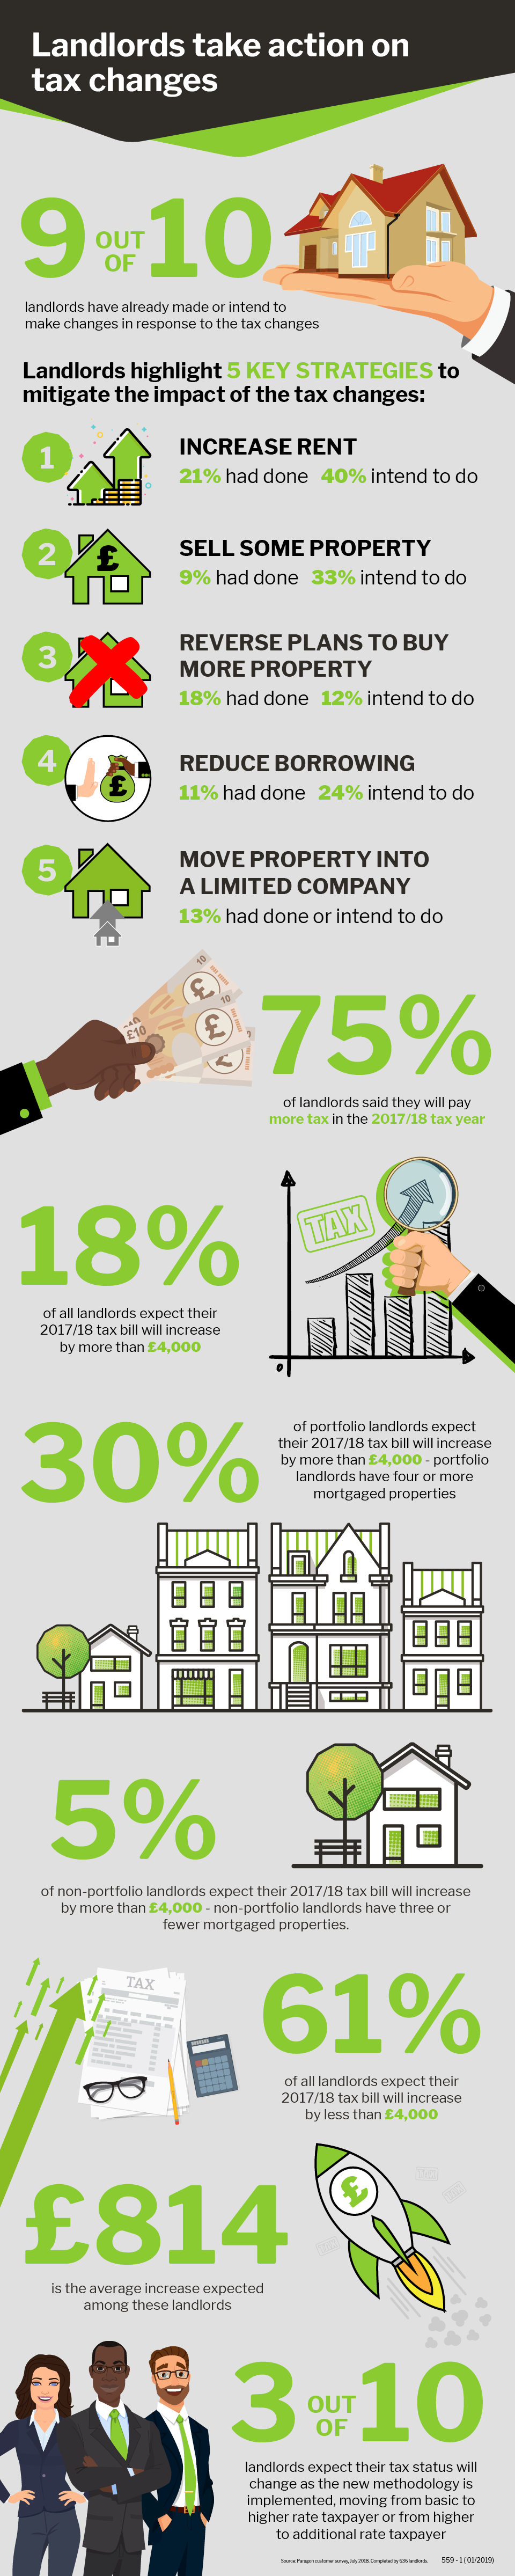 Landlords take action - Infographic